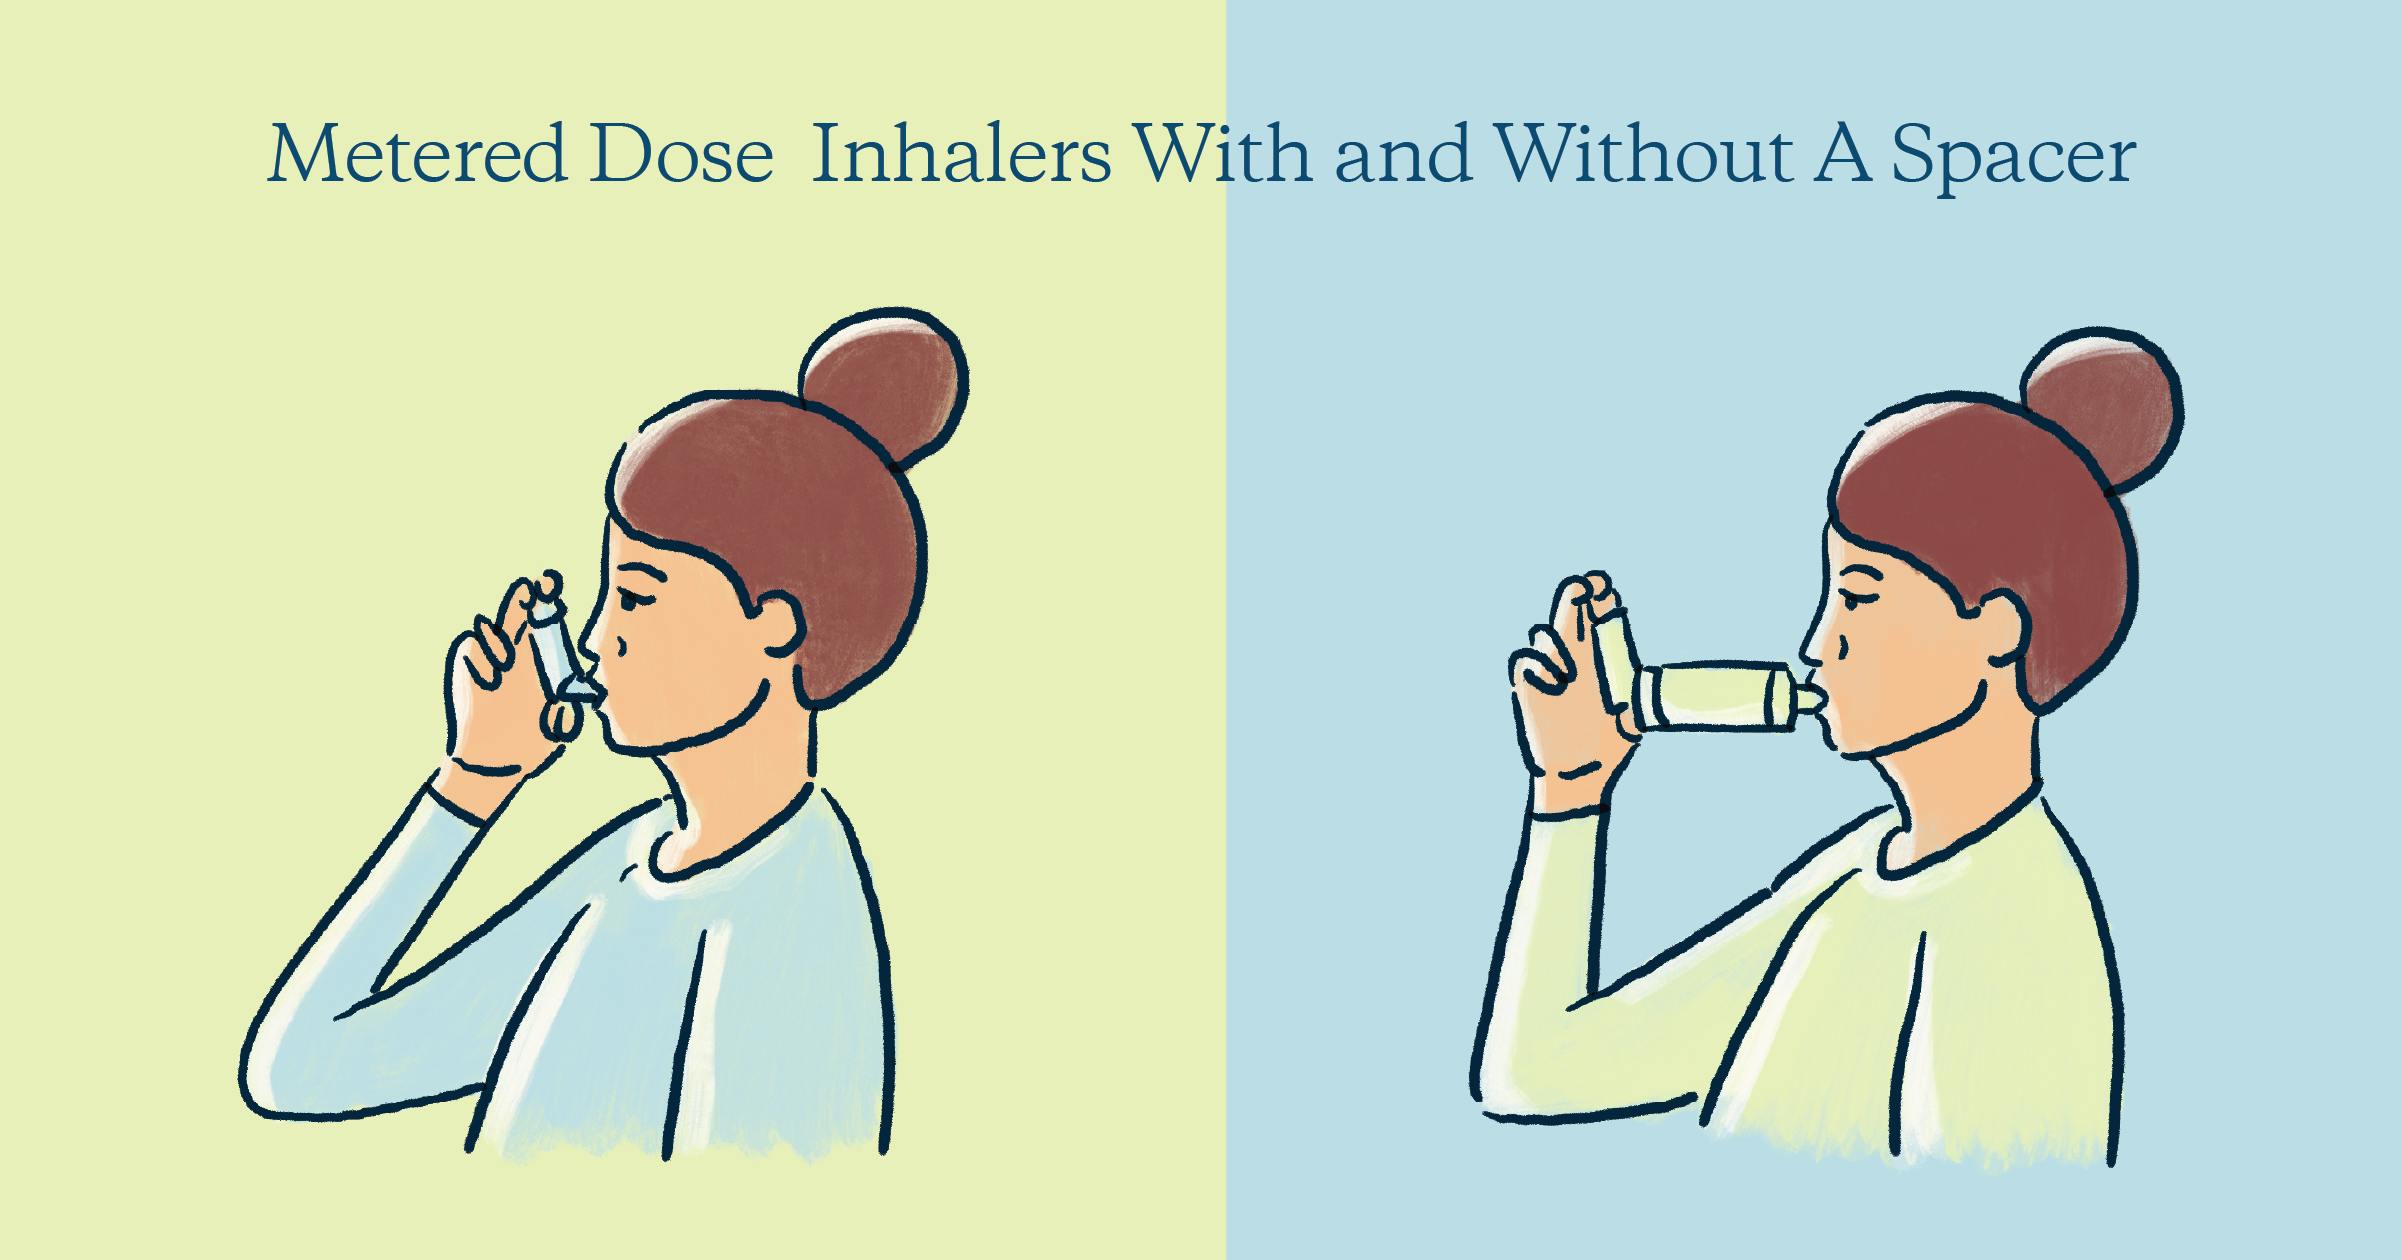 Metered dose inhalers with and without a spacer